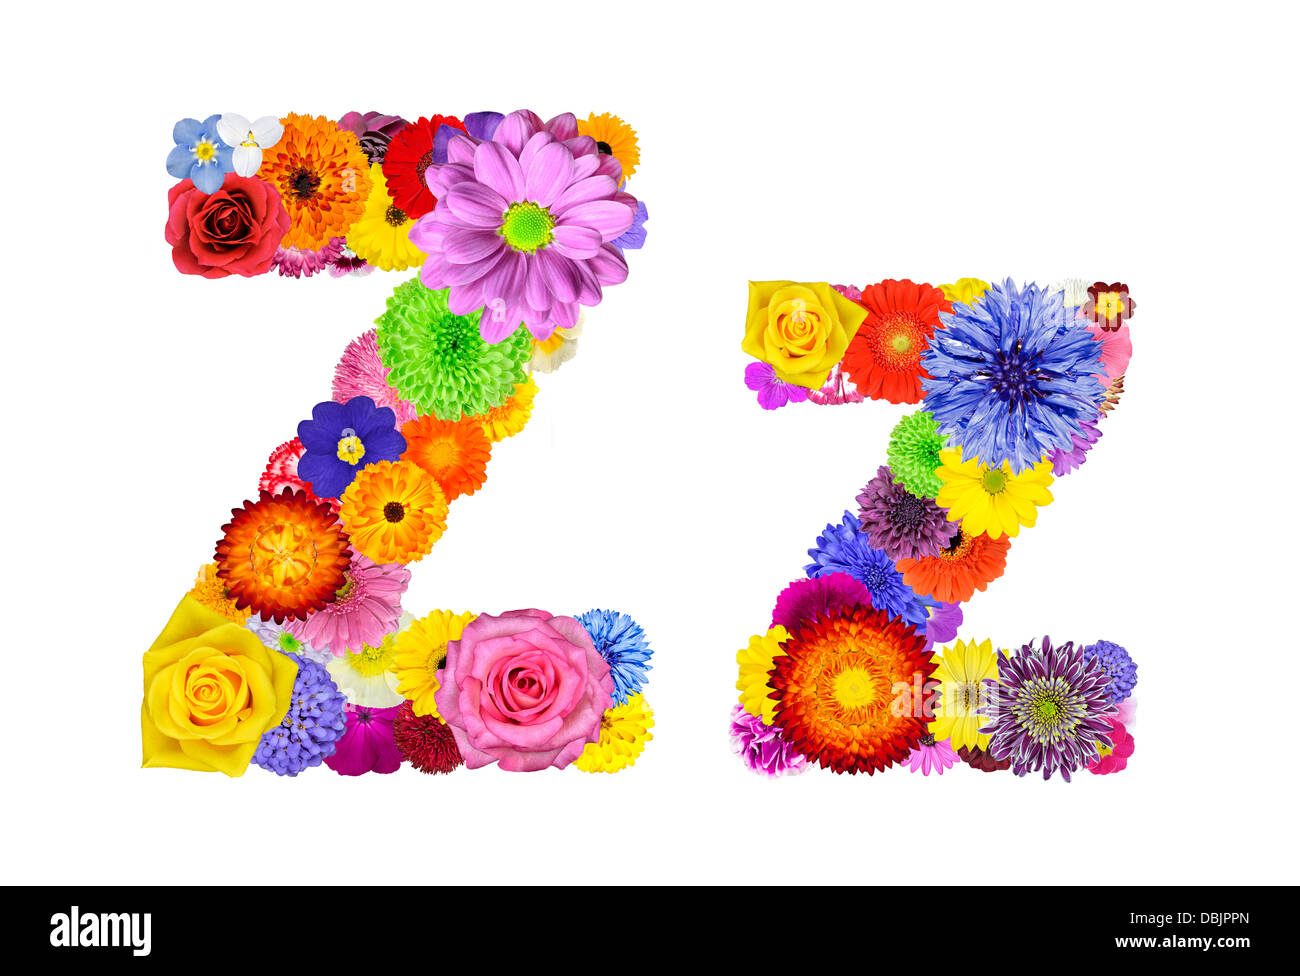 Letter Z of Flower Alphabet Isolated on White. Letter consist of many colorful and original flowers Stock Photo